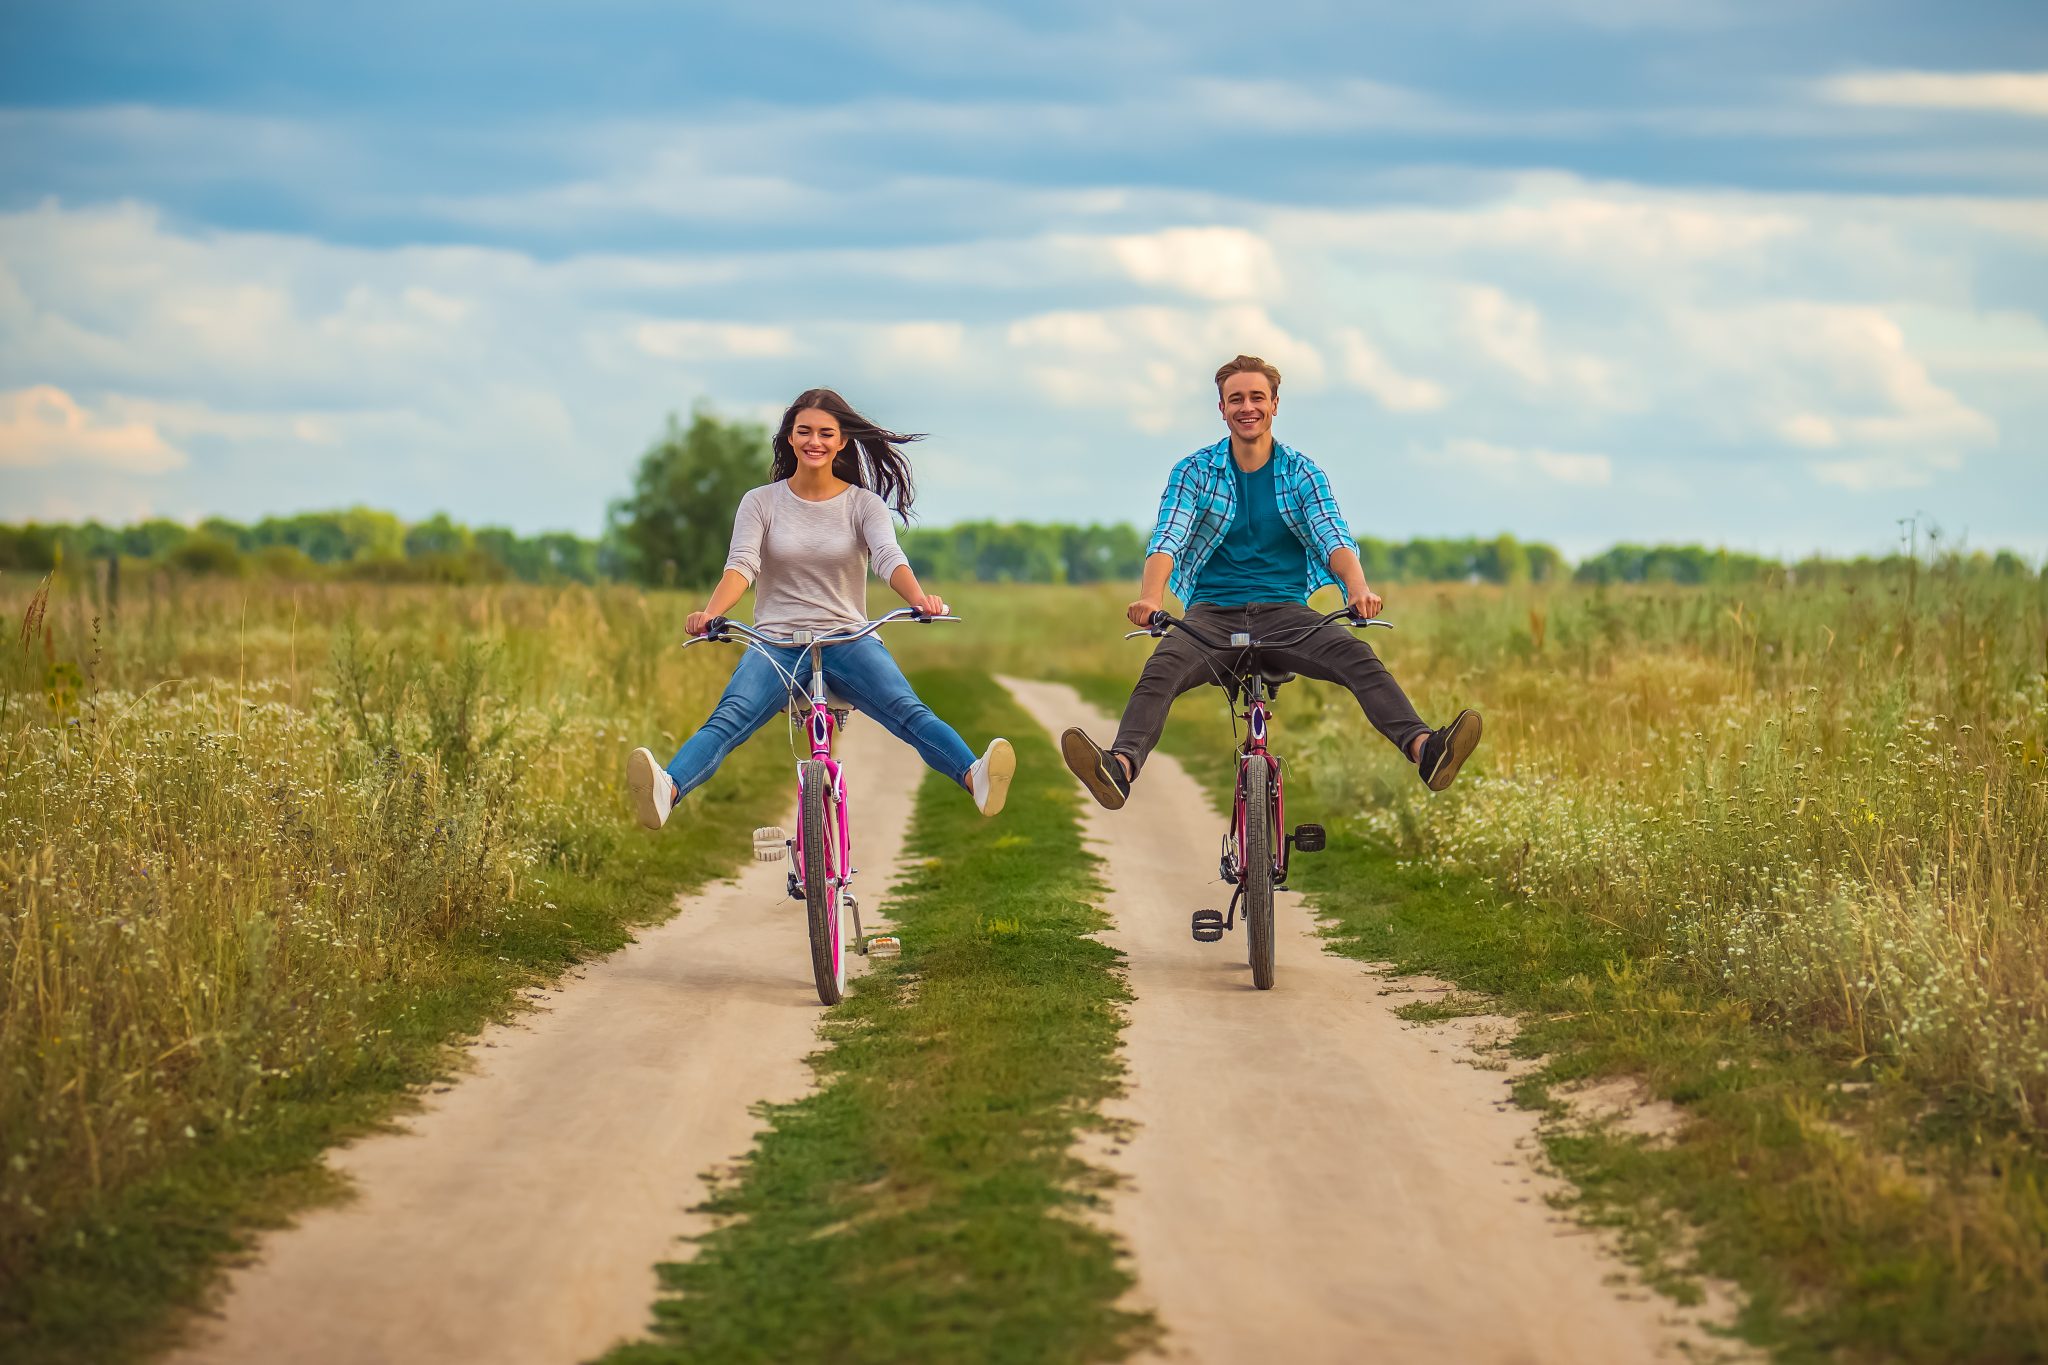 The happy couple ride a bicycle in a field